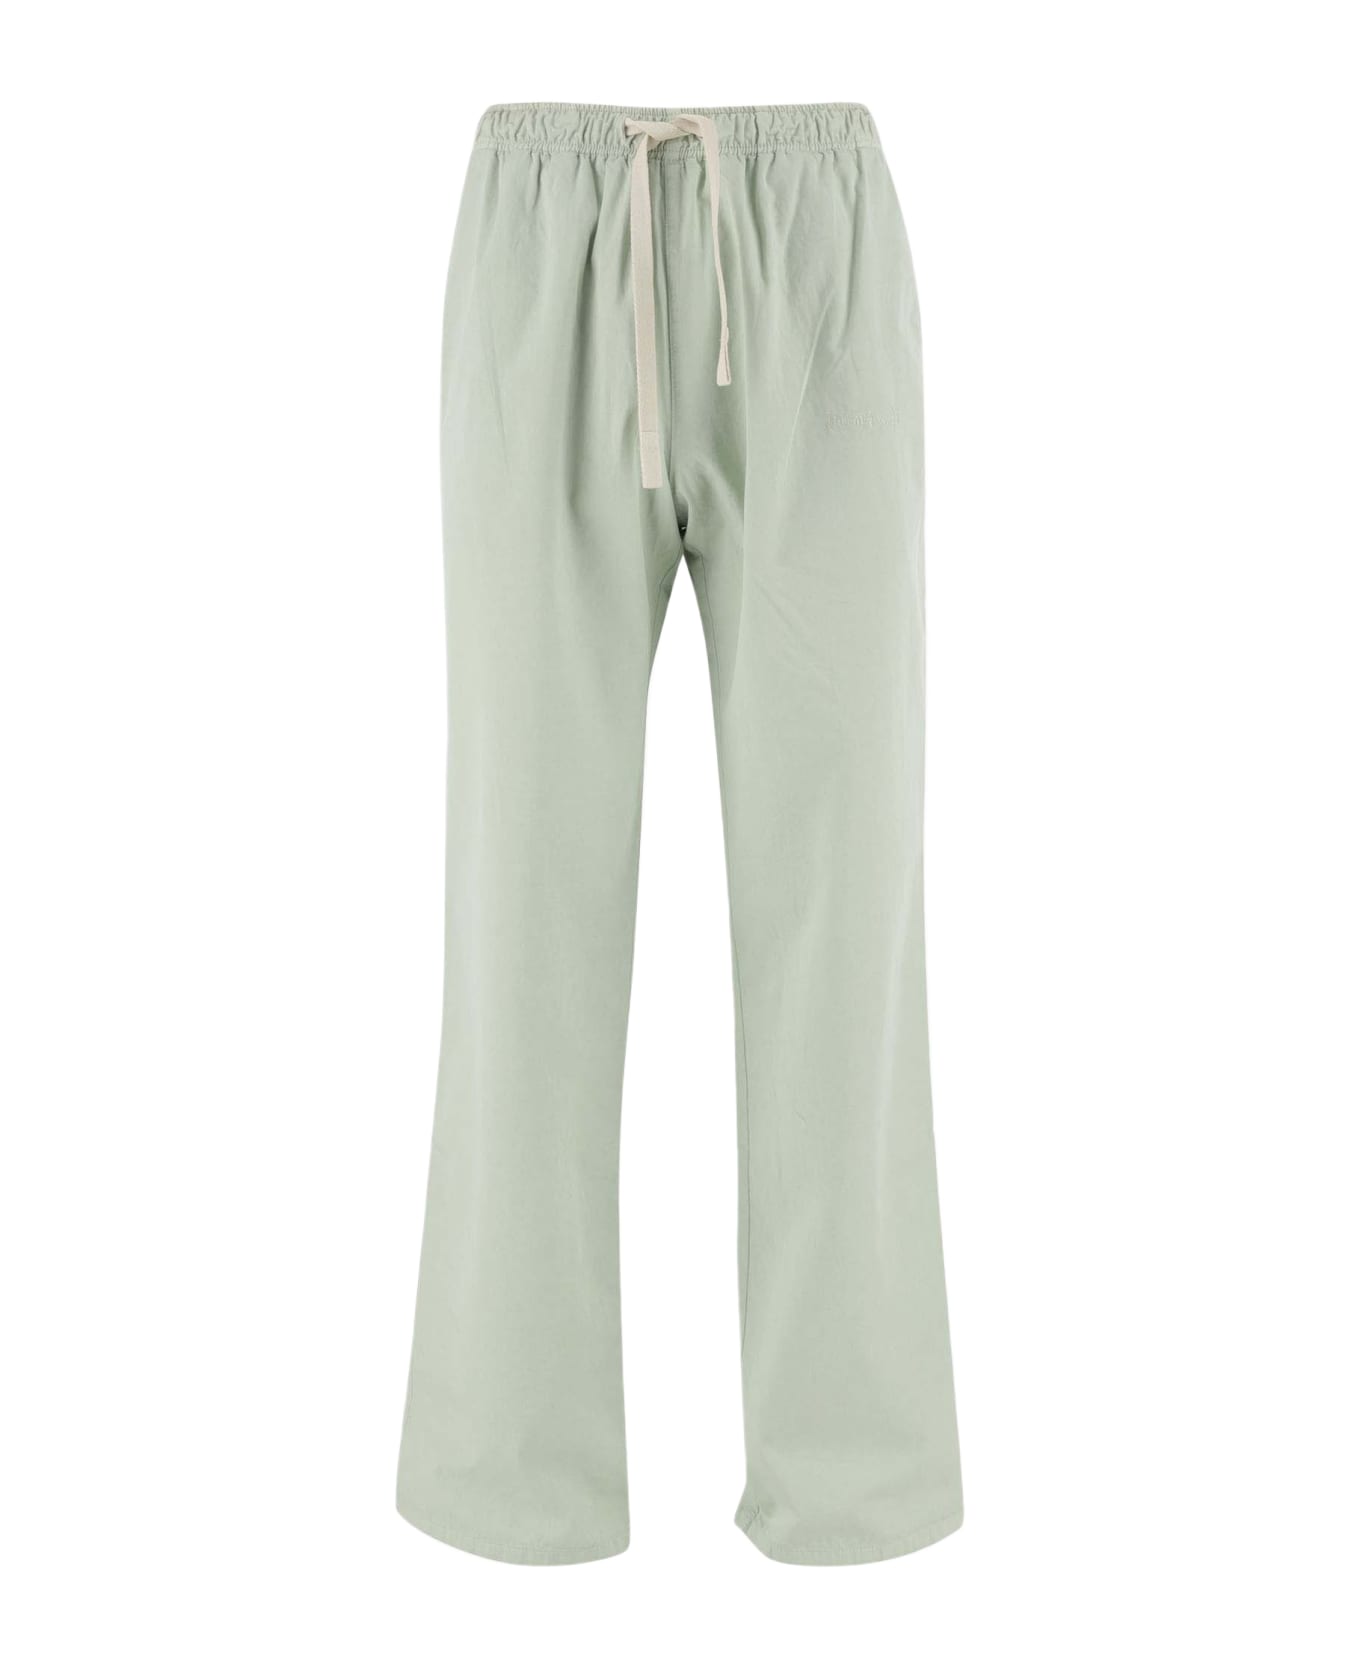 Palm Angels Cotton Pants - Green ボトムス